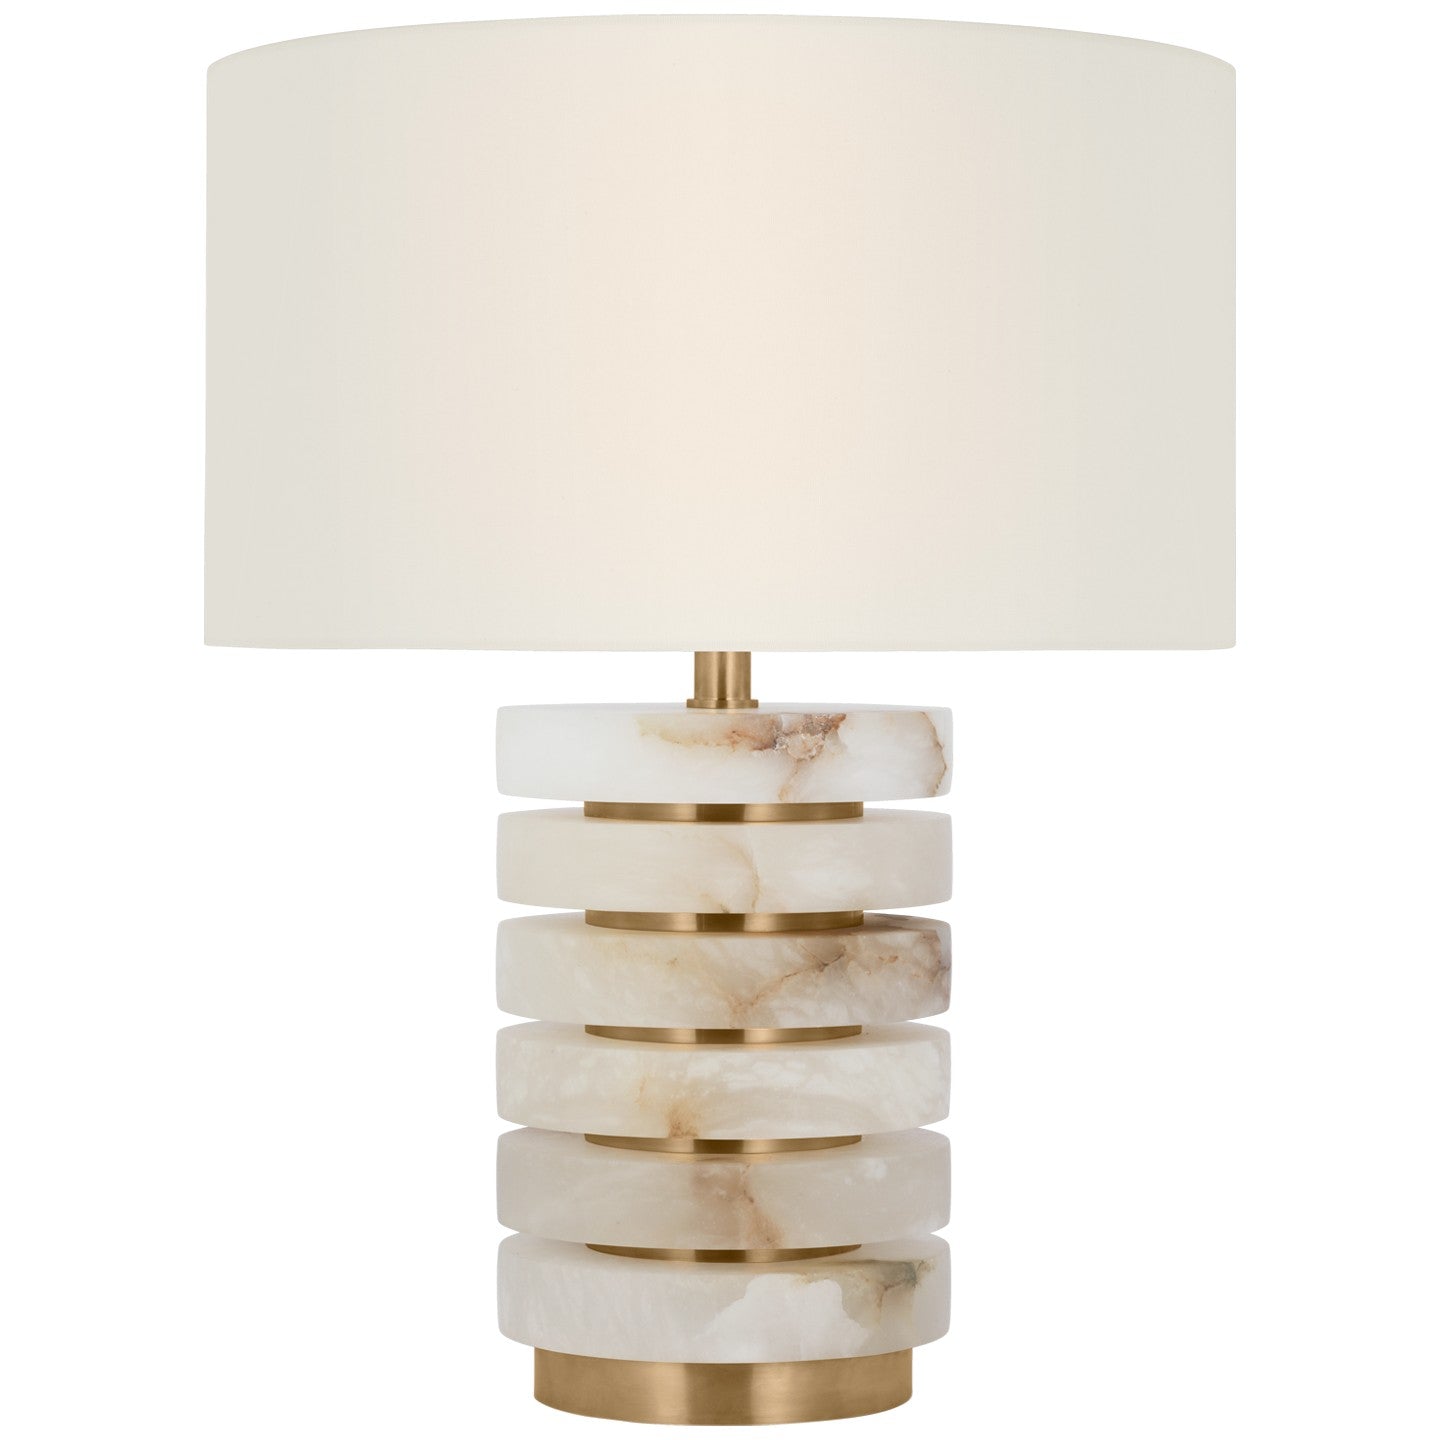 Visual Comfort Signature - WS 3900ALB/HAB-L - LED Table Lamp - Diski - Alabaster and Hand-Rubbed Antique Brass